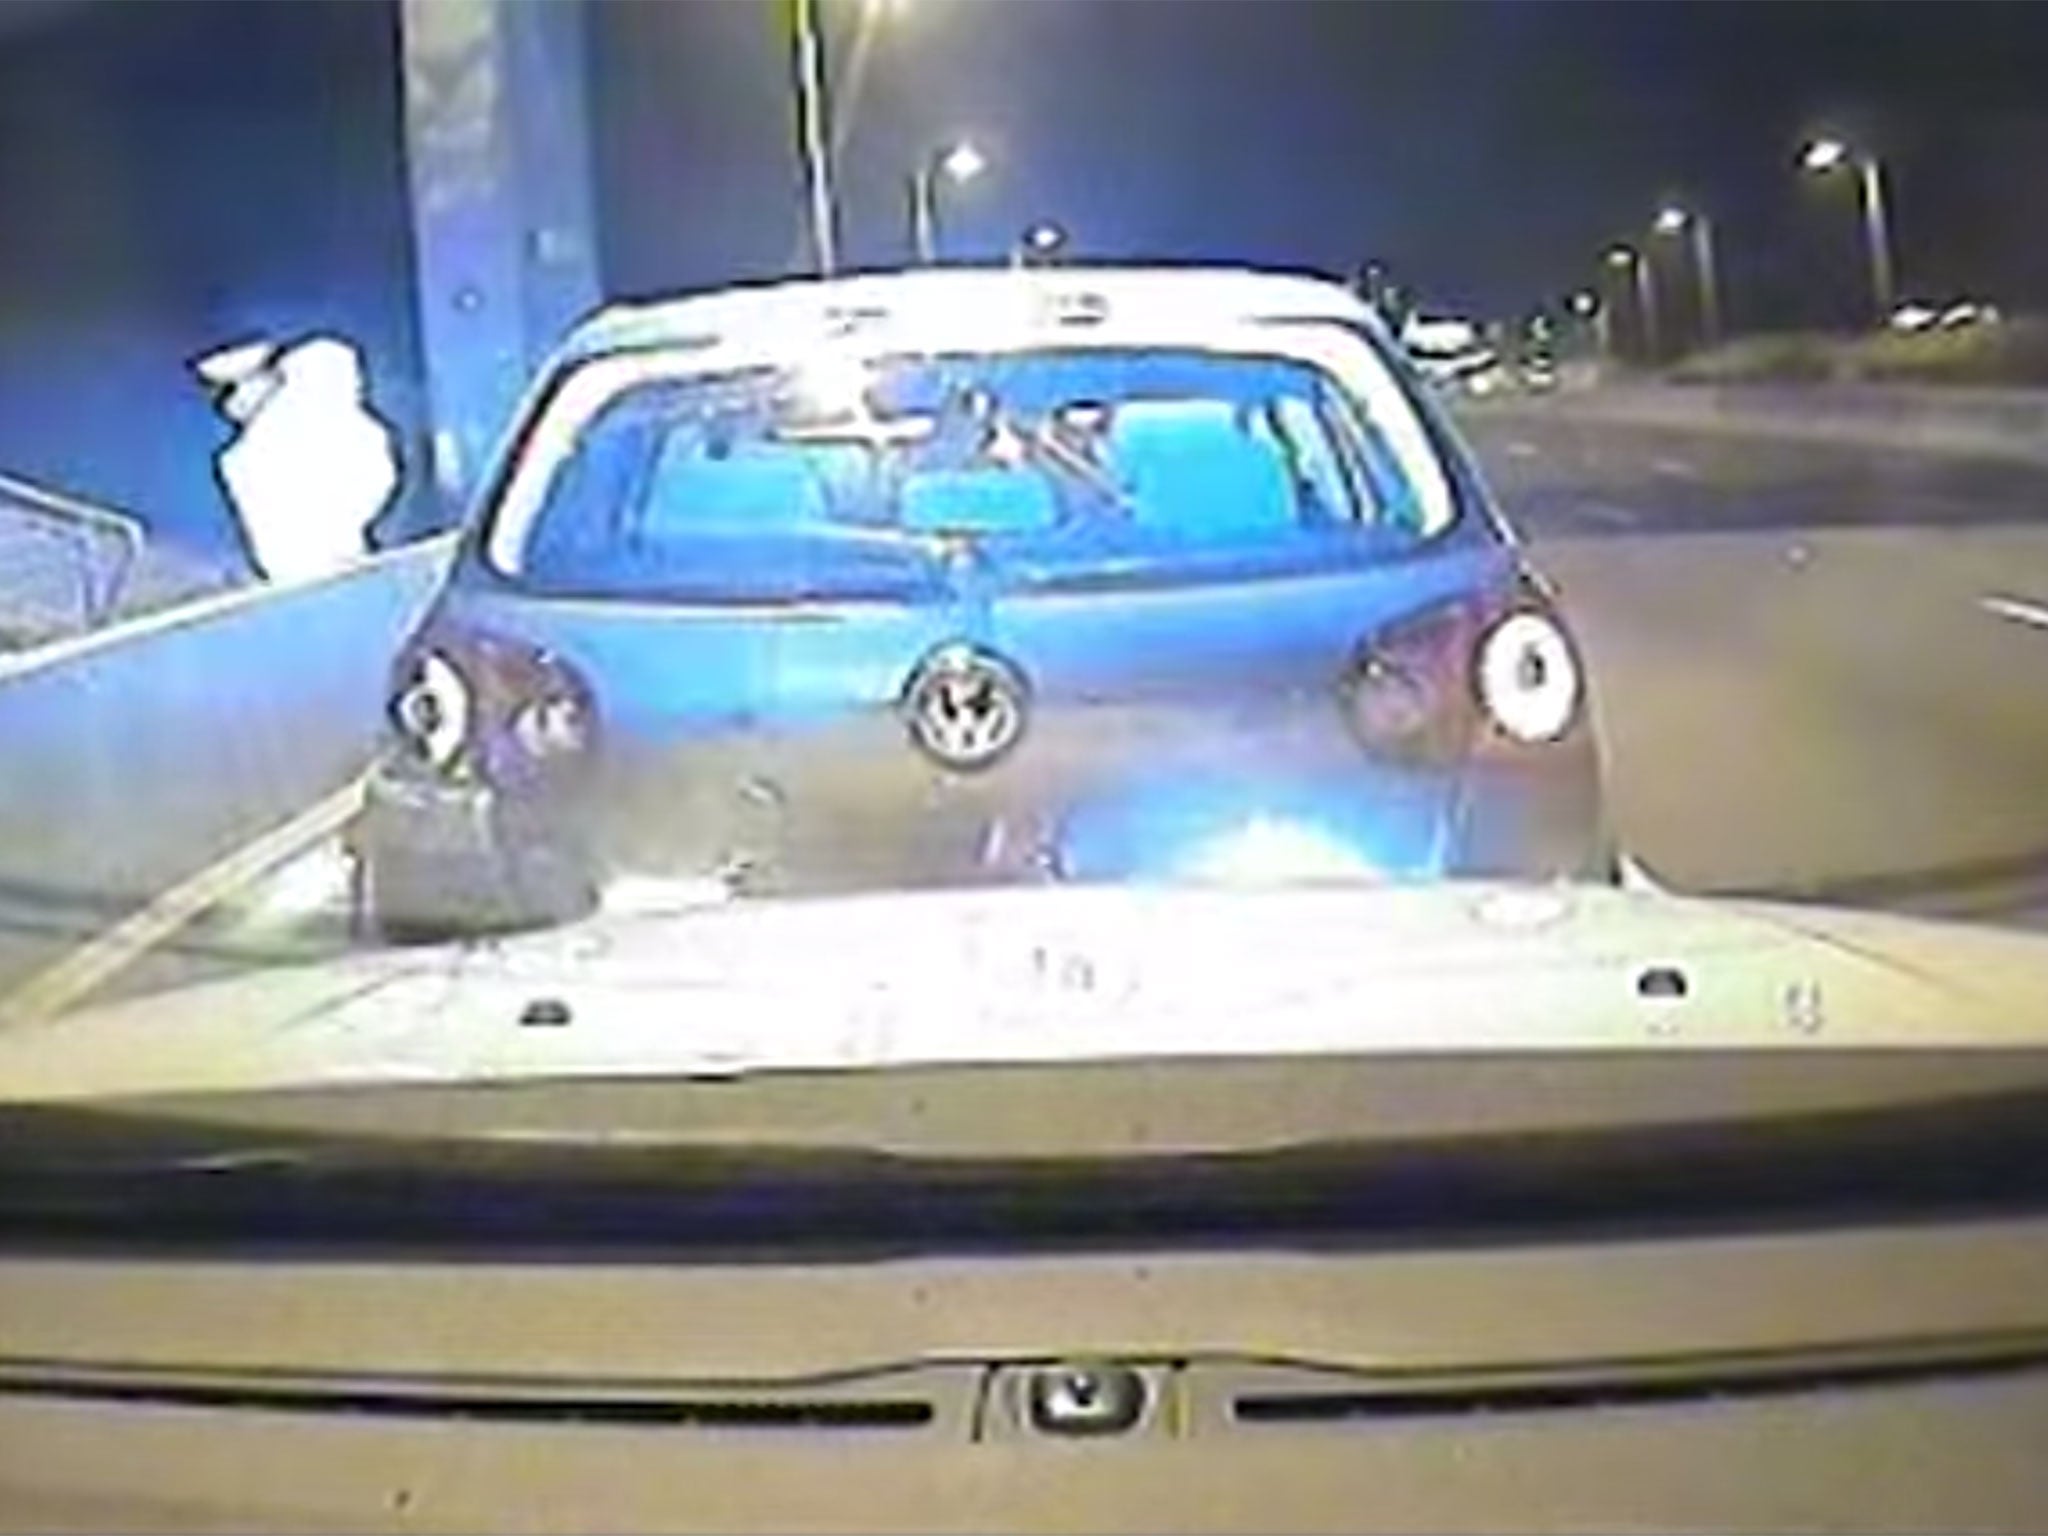 Essex police have released the shocking footage in a bid to catch the criminals who have been on the run since June.